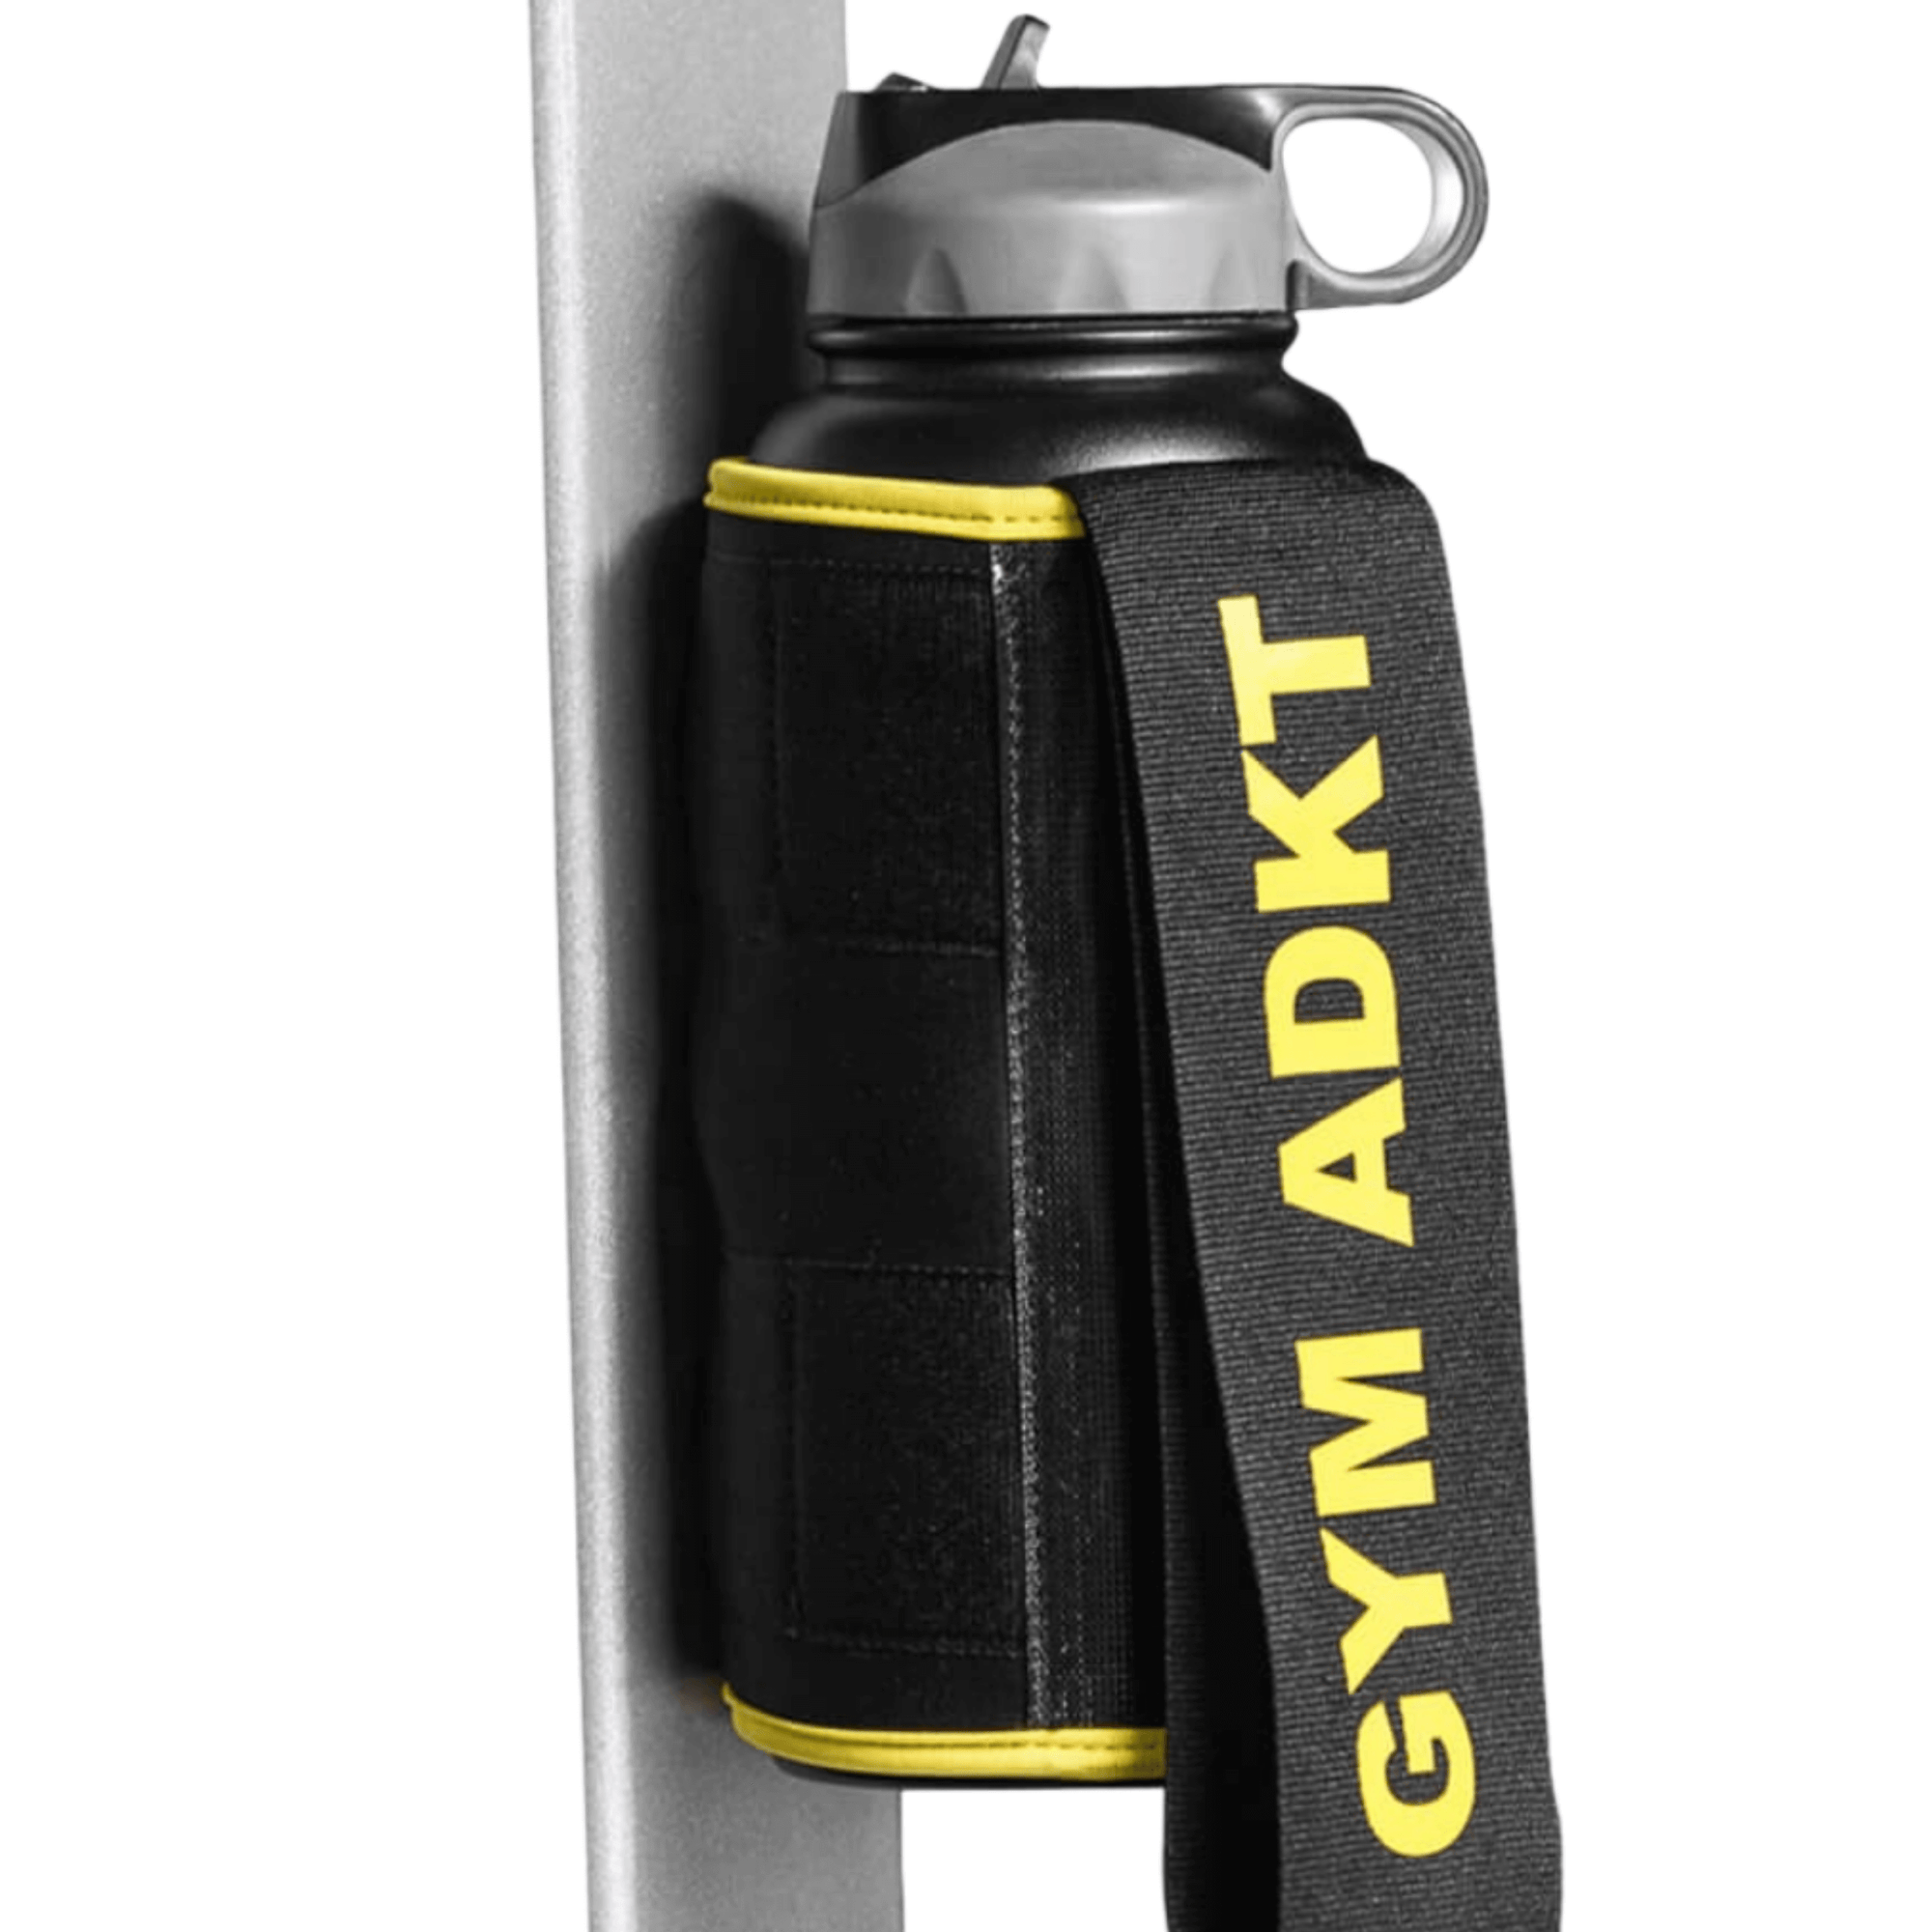 Gym Mate Magnetic Water Bottle Sleeve Pouch. Attaches Magnetically to Metal Surface So Your Bottle Is Always Within Reach. Accessory Pockets for Cell